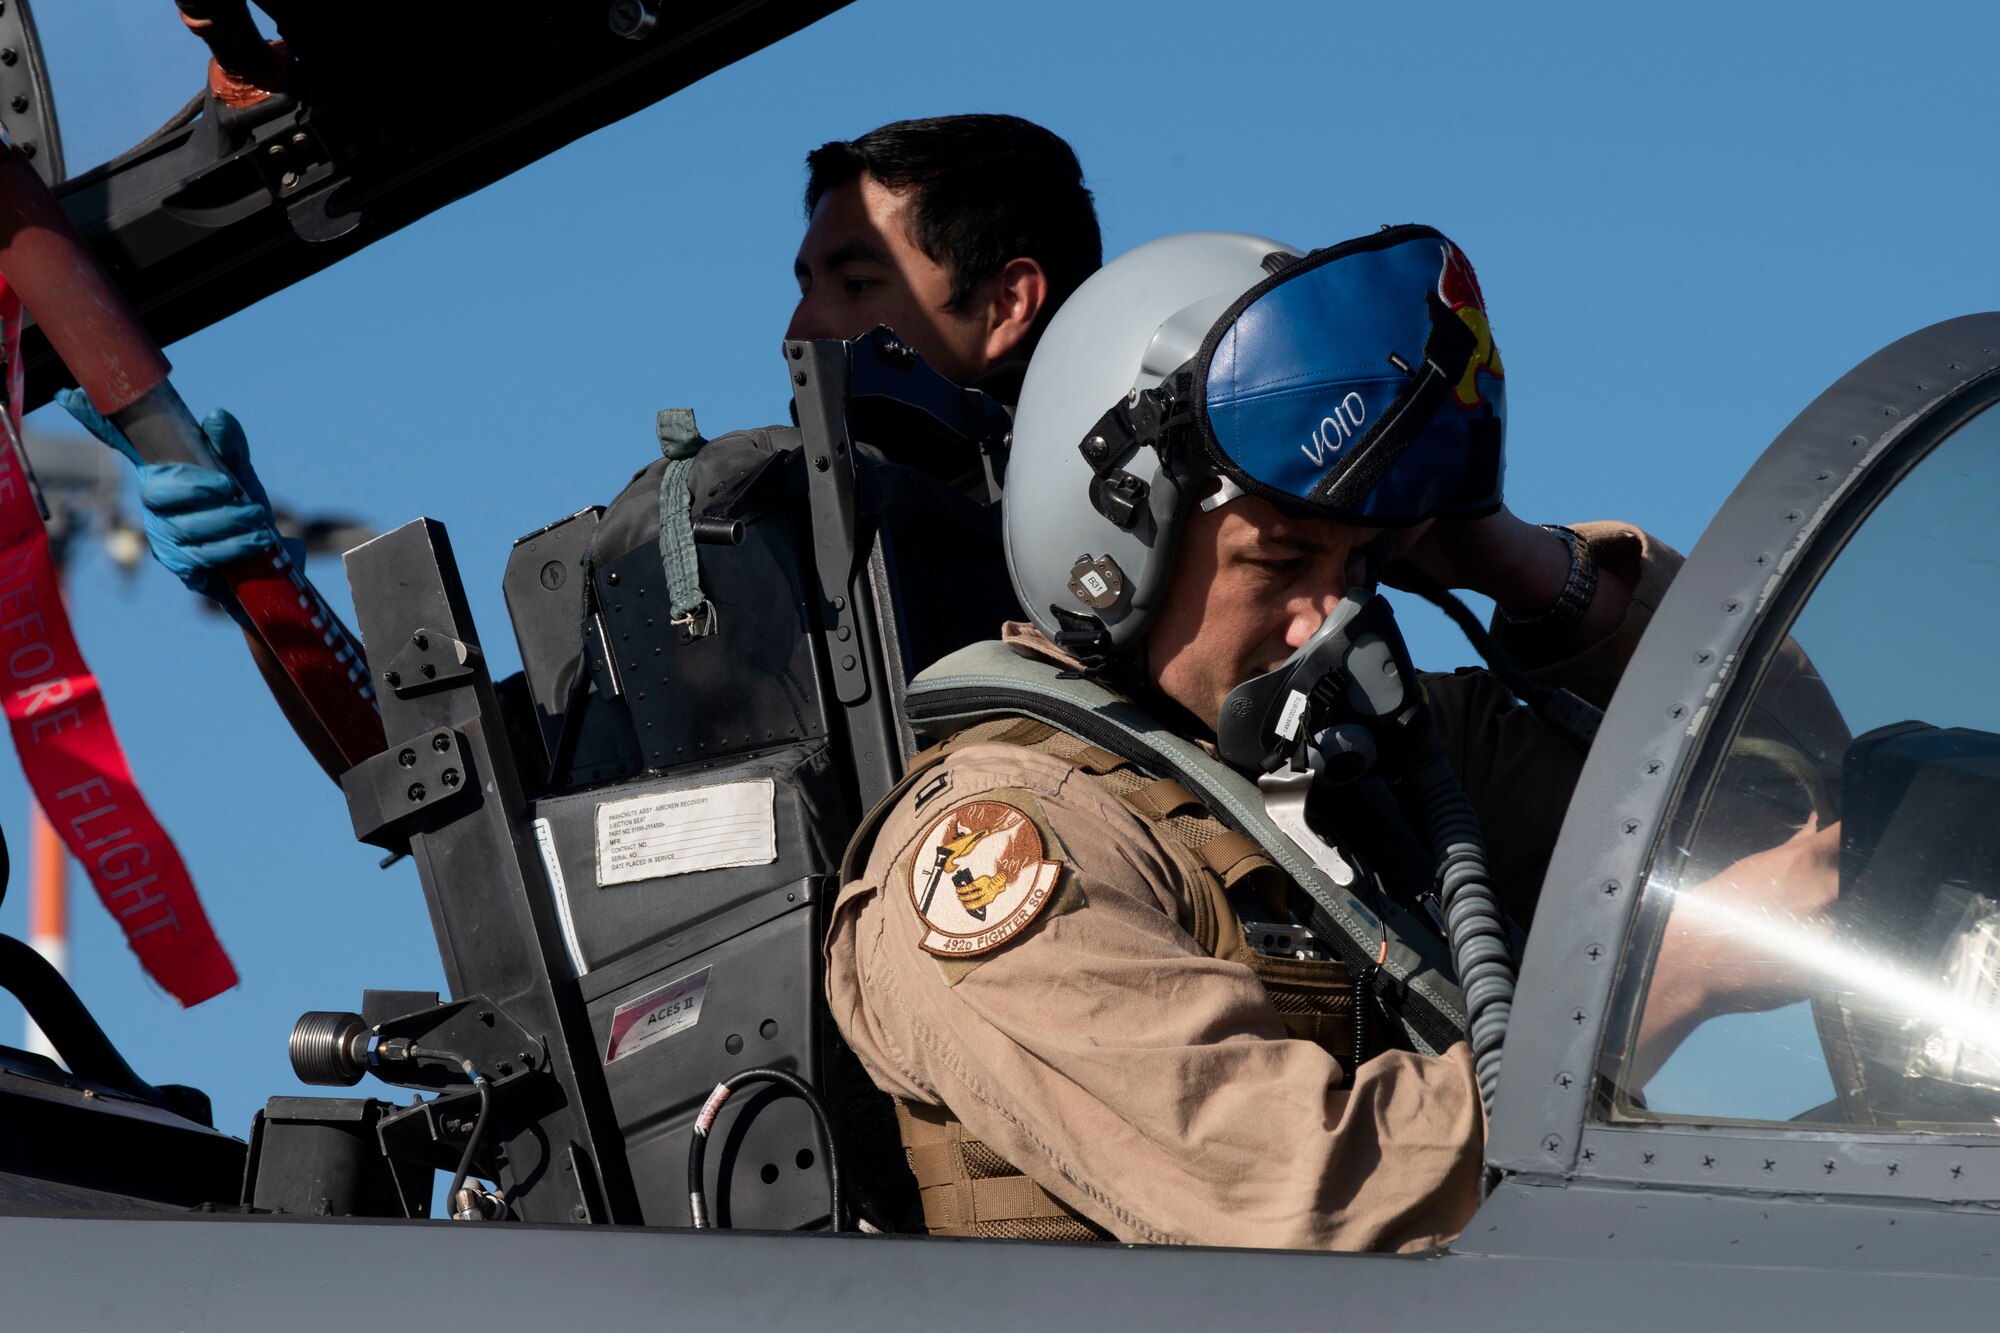 A 492nd Fighter Squadron pilot conducts pre-flight preparations before taking off from Royal Air Force Lakenheath, England, May 6, 2020. The 492nd FS is the first fighter squadron from the Liberty Wing to deploy since the start of the COVID-19 pandemic. (U.S. Air Force photo by Senior Airman Christopher S. Sparks)